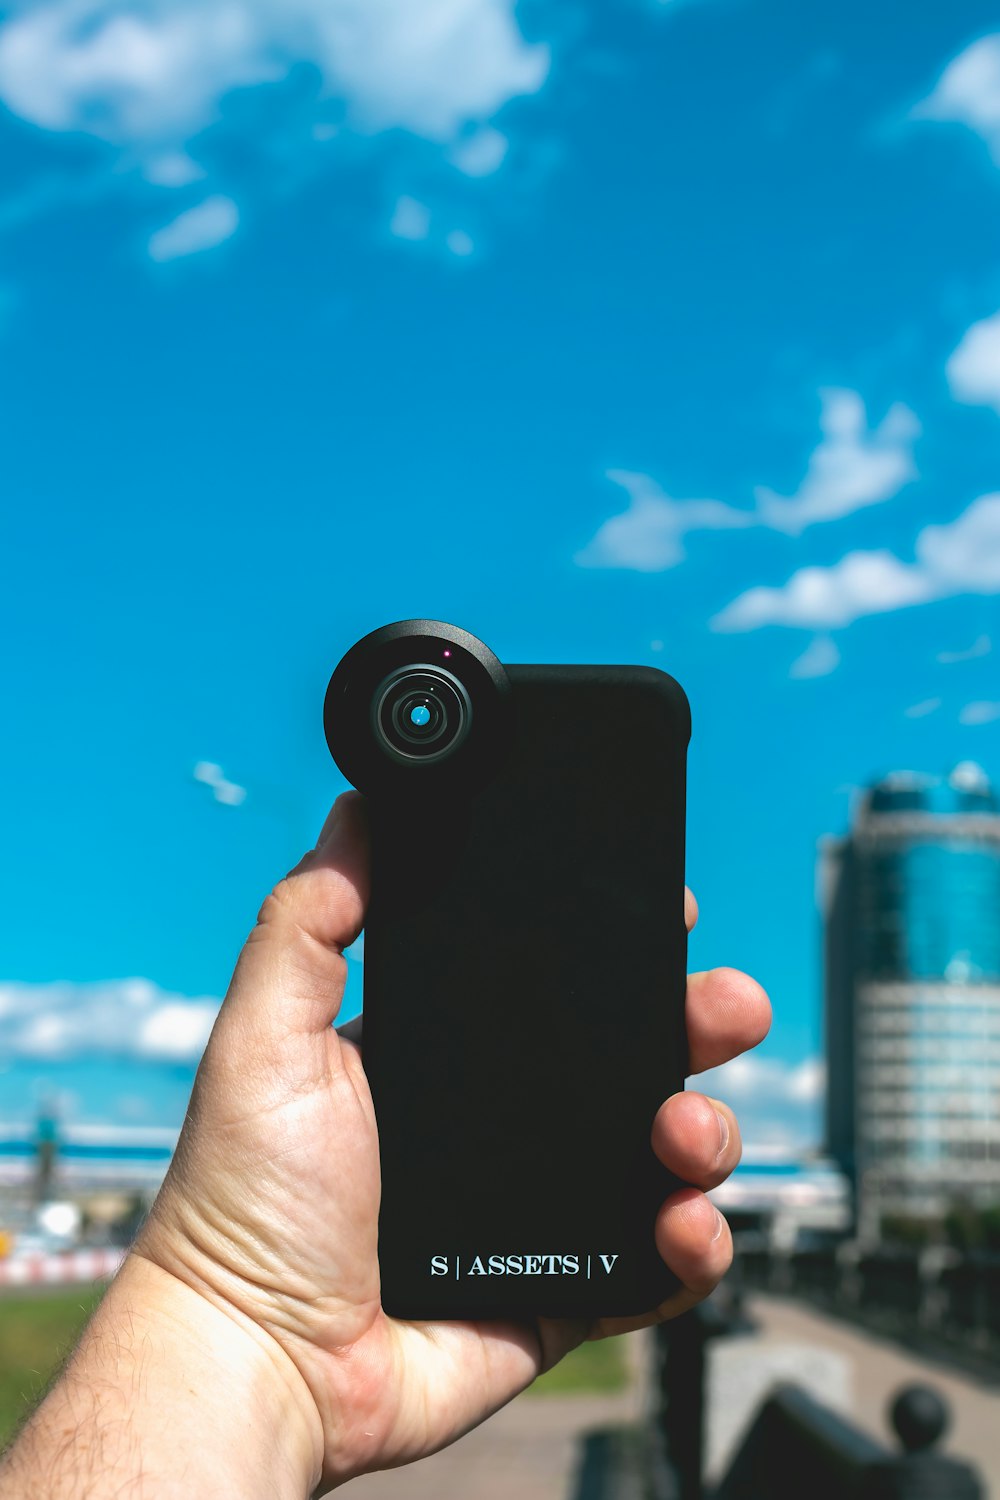 person holding black smartphone taking photo of city buildings during daytime